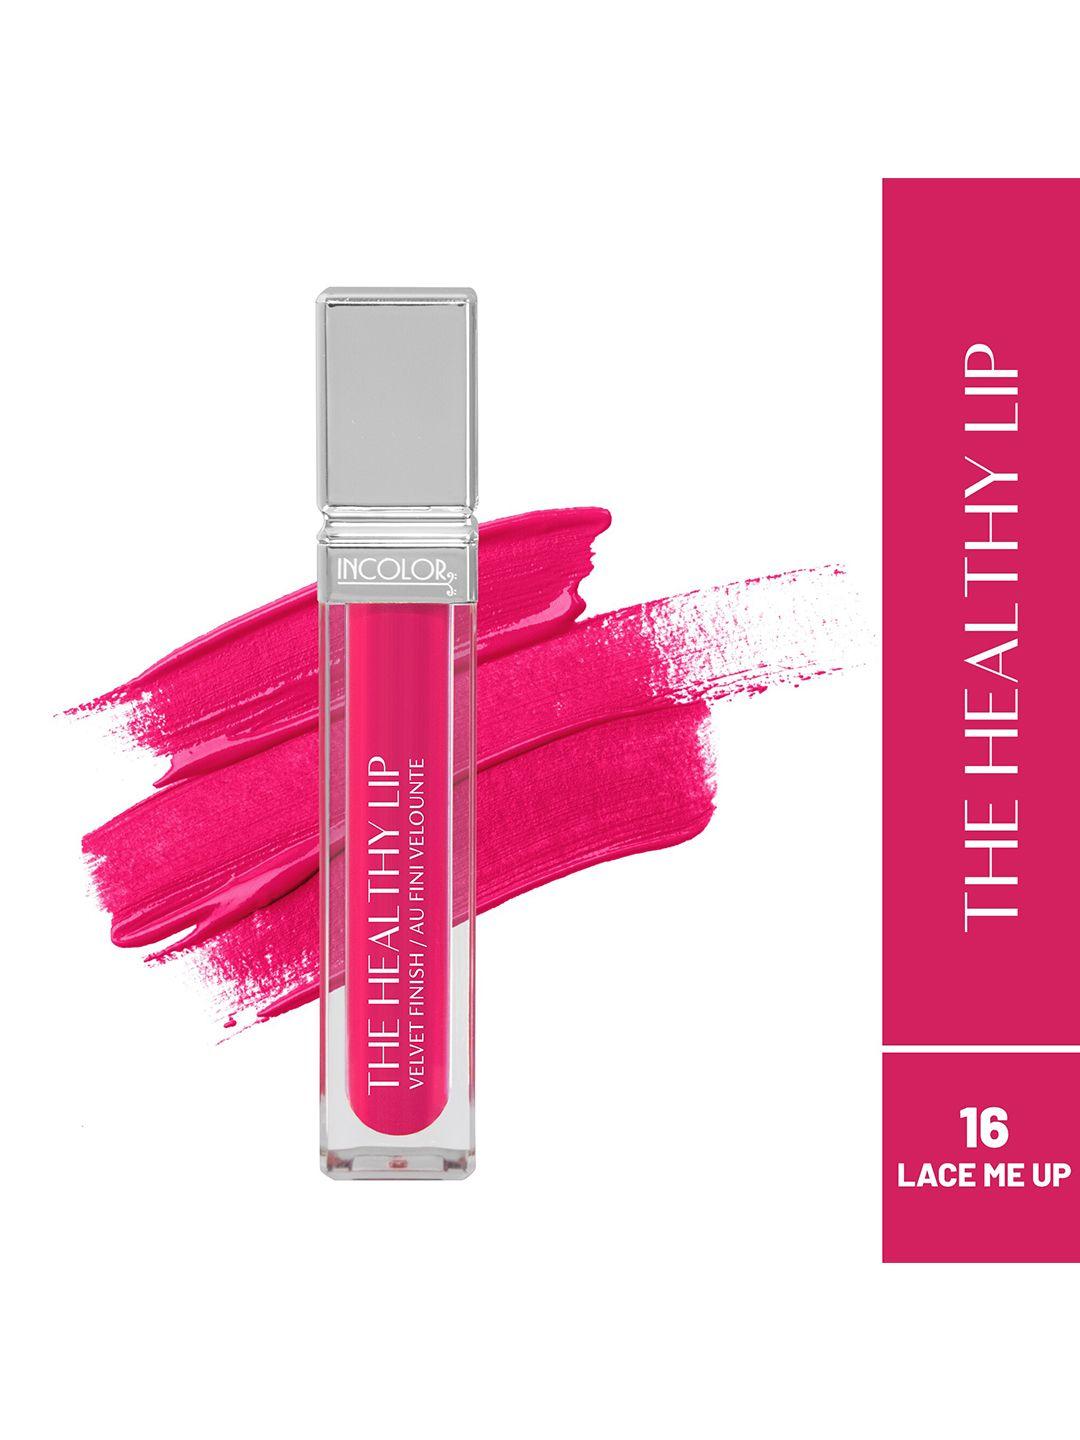 incolor the healthy lip velvet finish lip gloss - 8ml -  lace me up 16